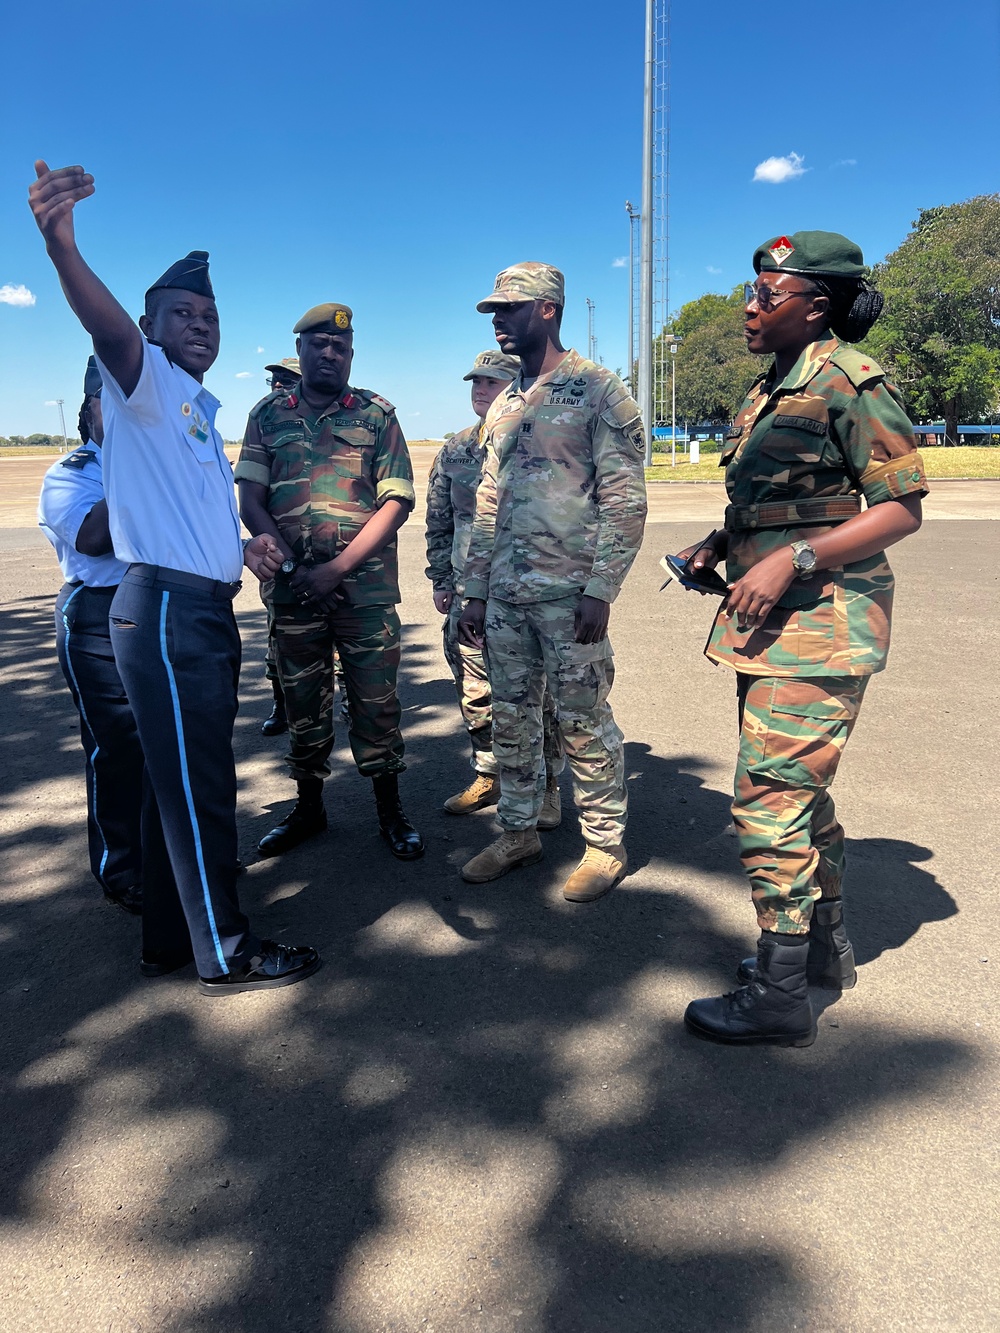 African Lands Forces Summit 24 preparation enters final stages in Livingstone, Zambia